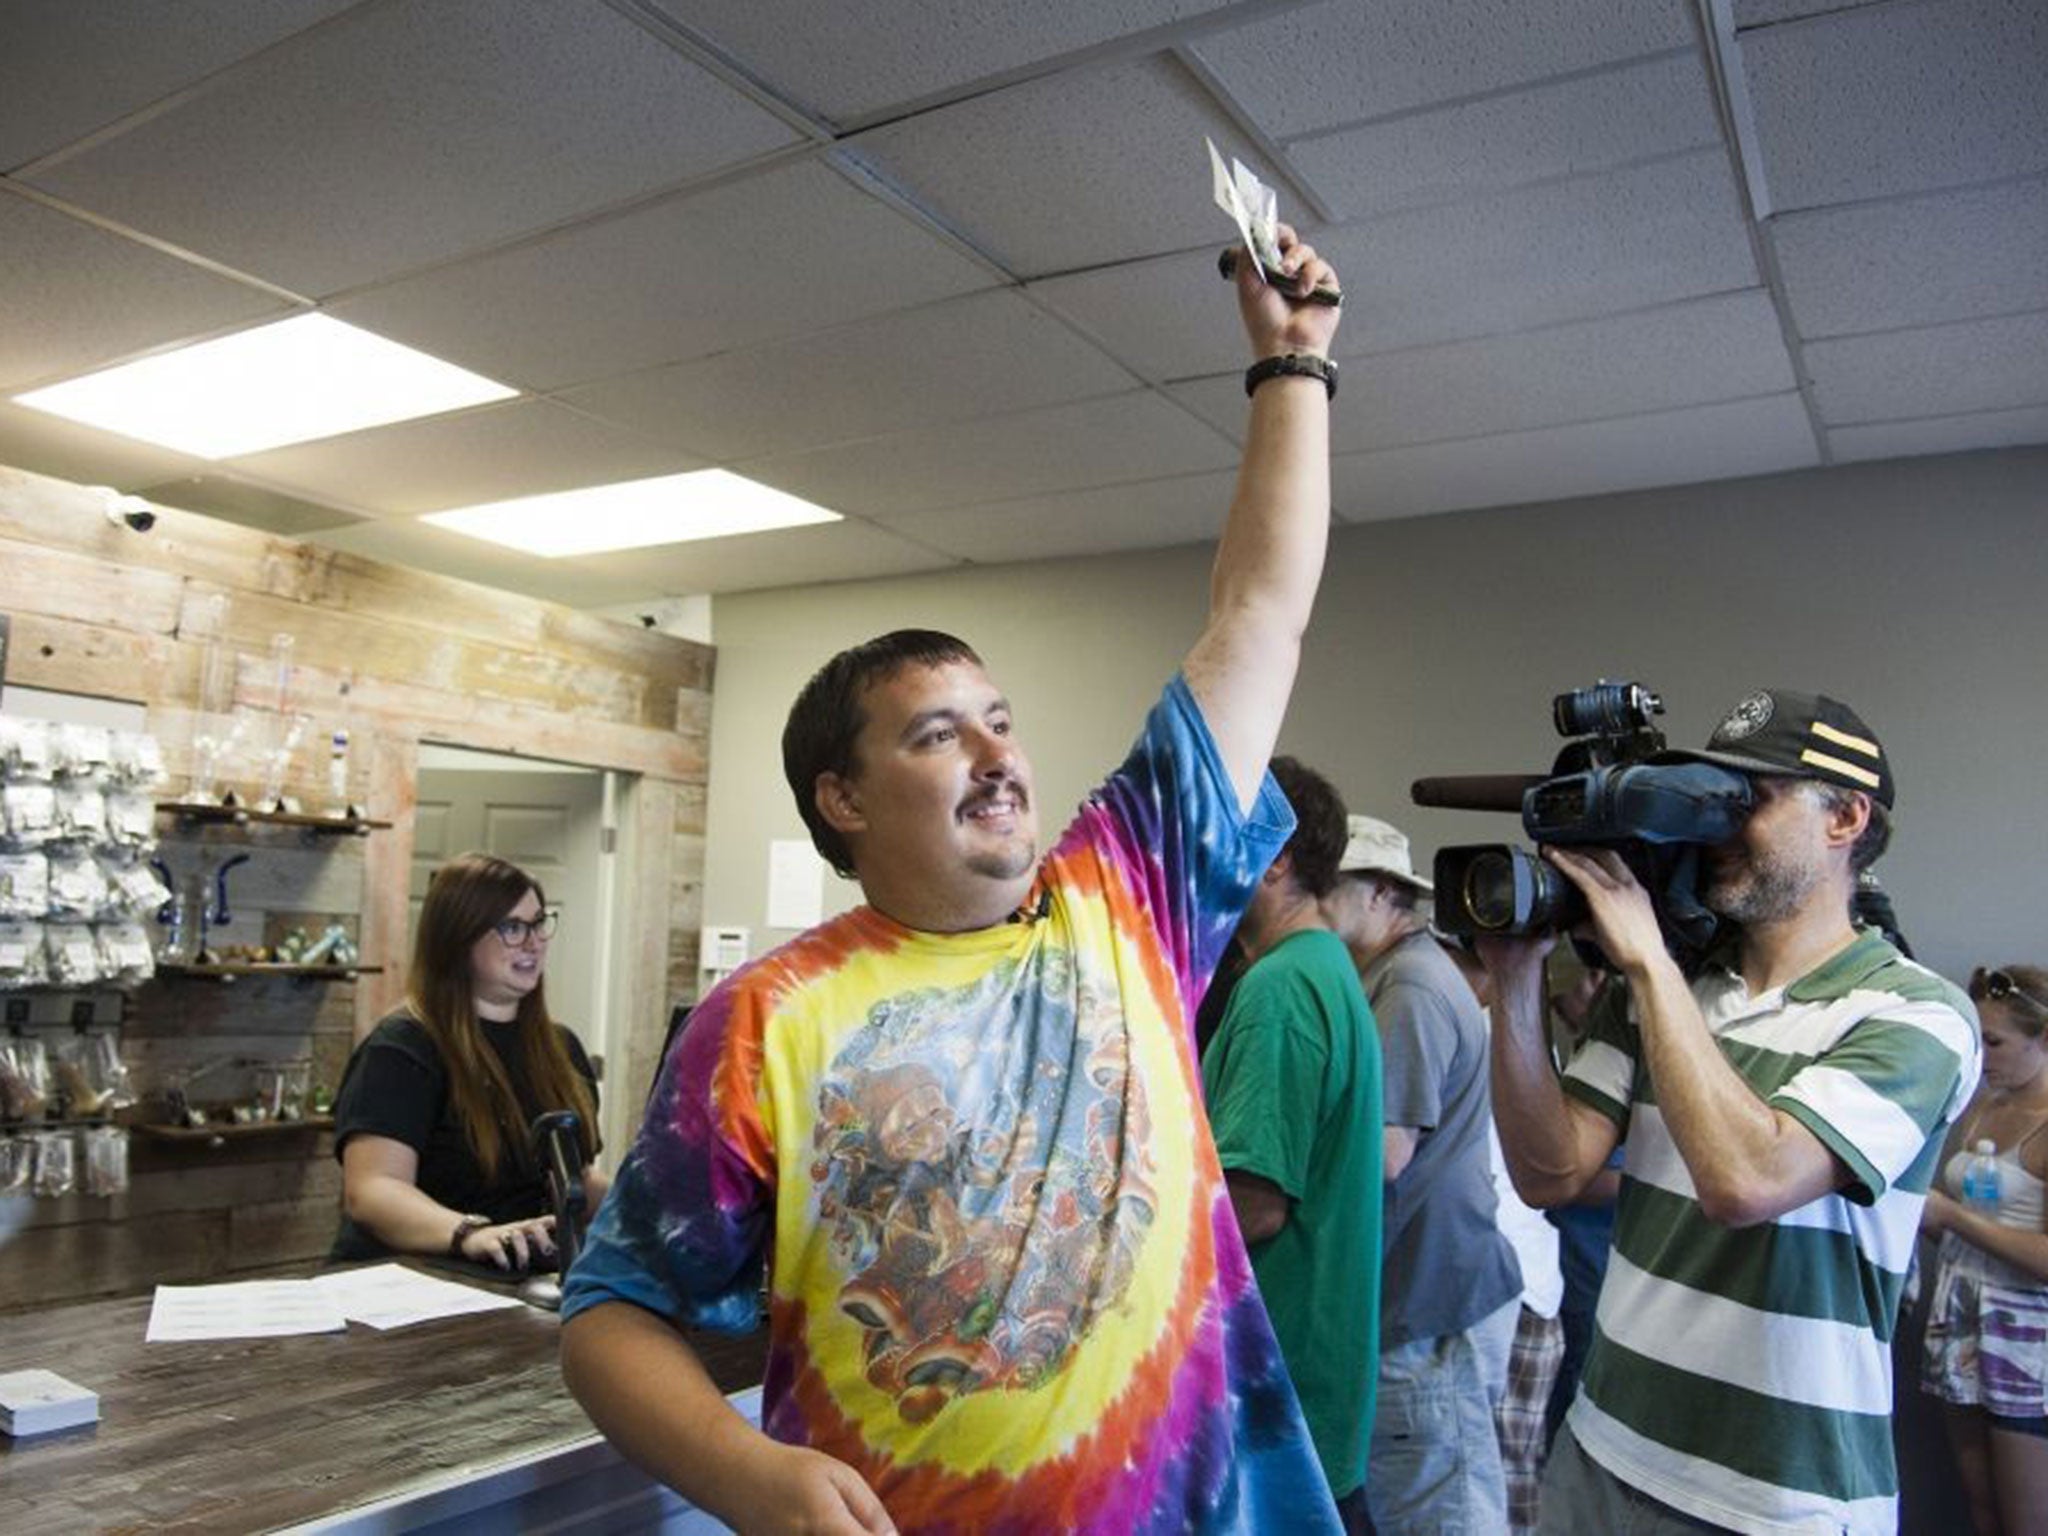 Mike Boyer turns to the crowd outside, showing off the 4 grammes of marijuana he bought as the first in line to legally purchase marijuana at Spokane Green Leaf